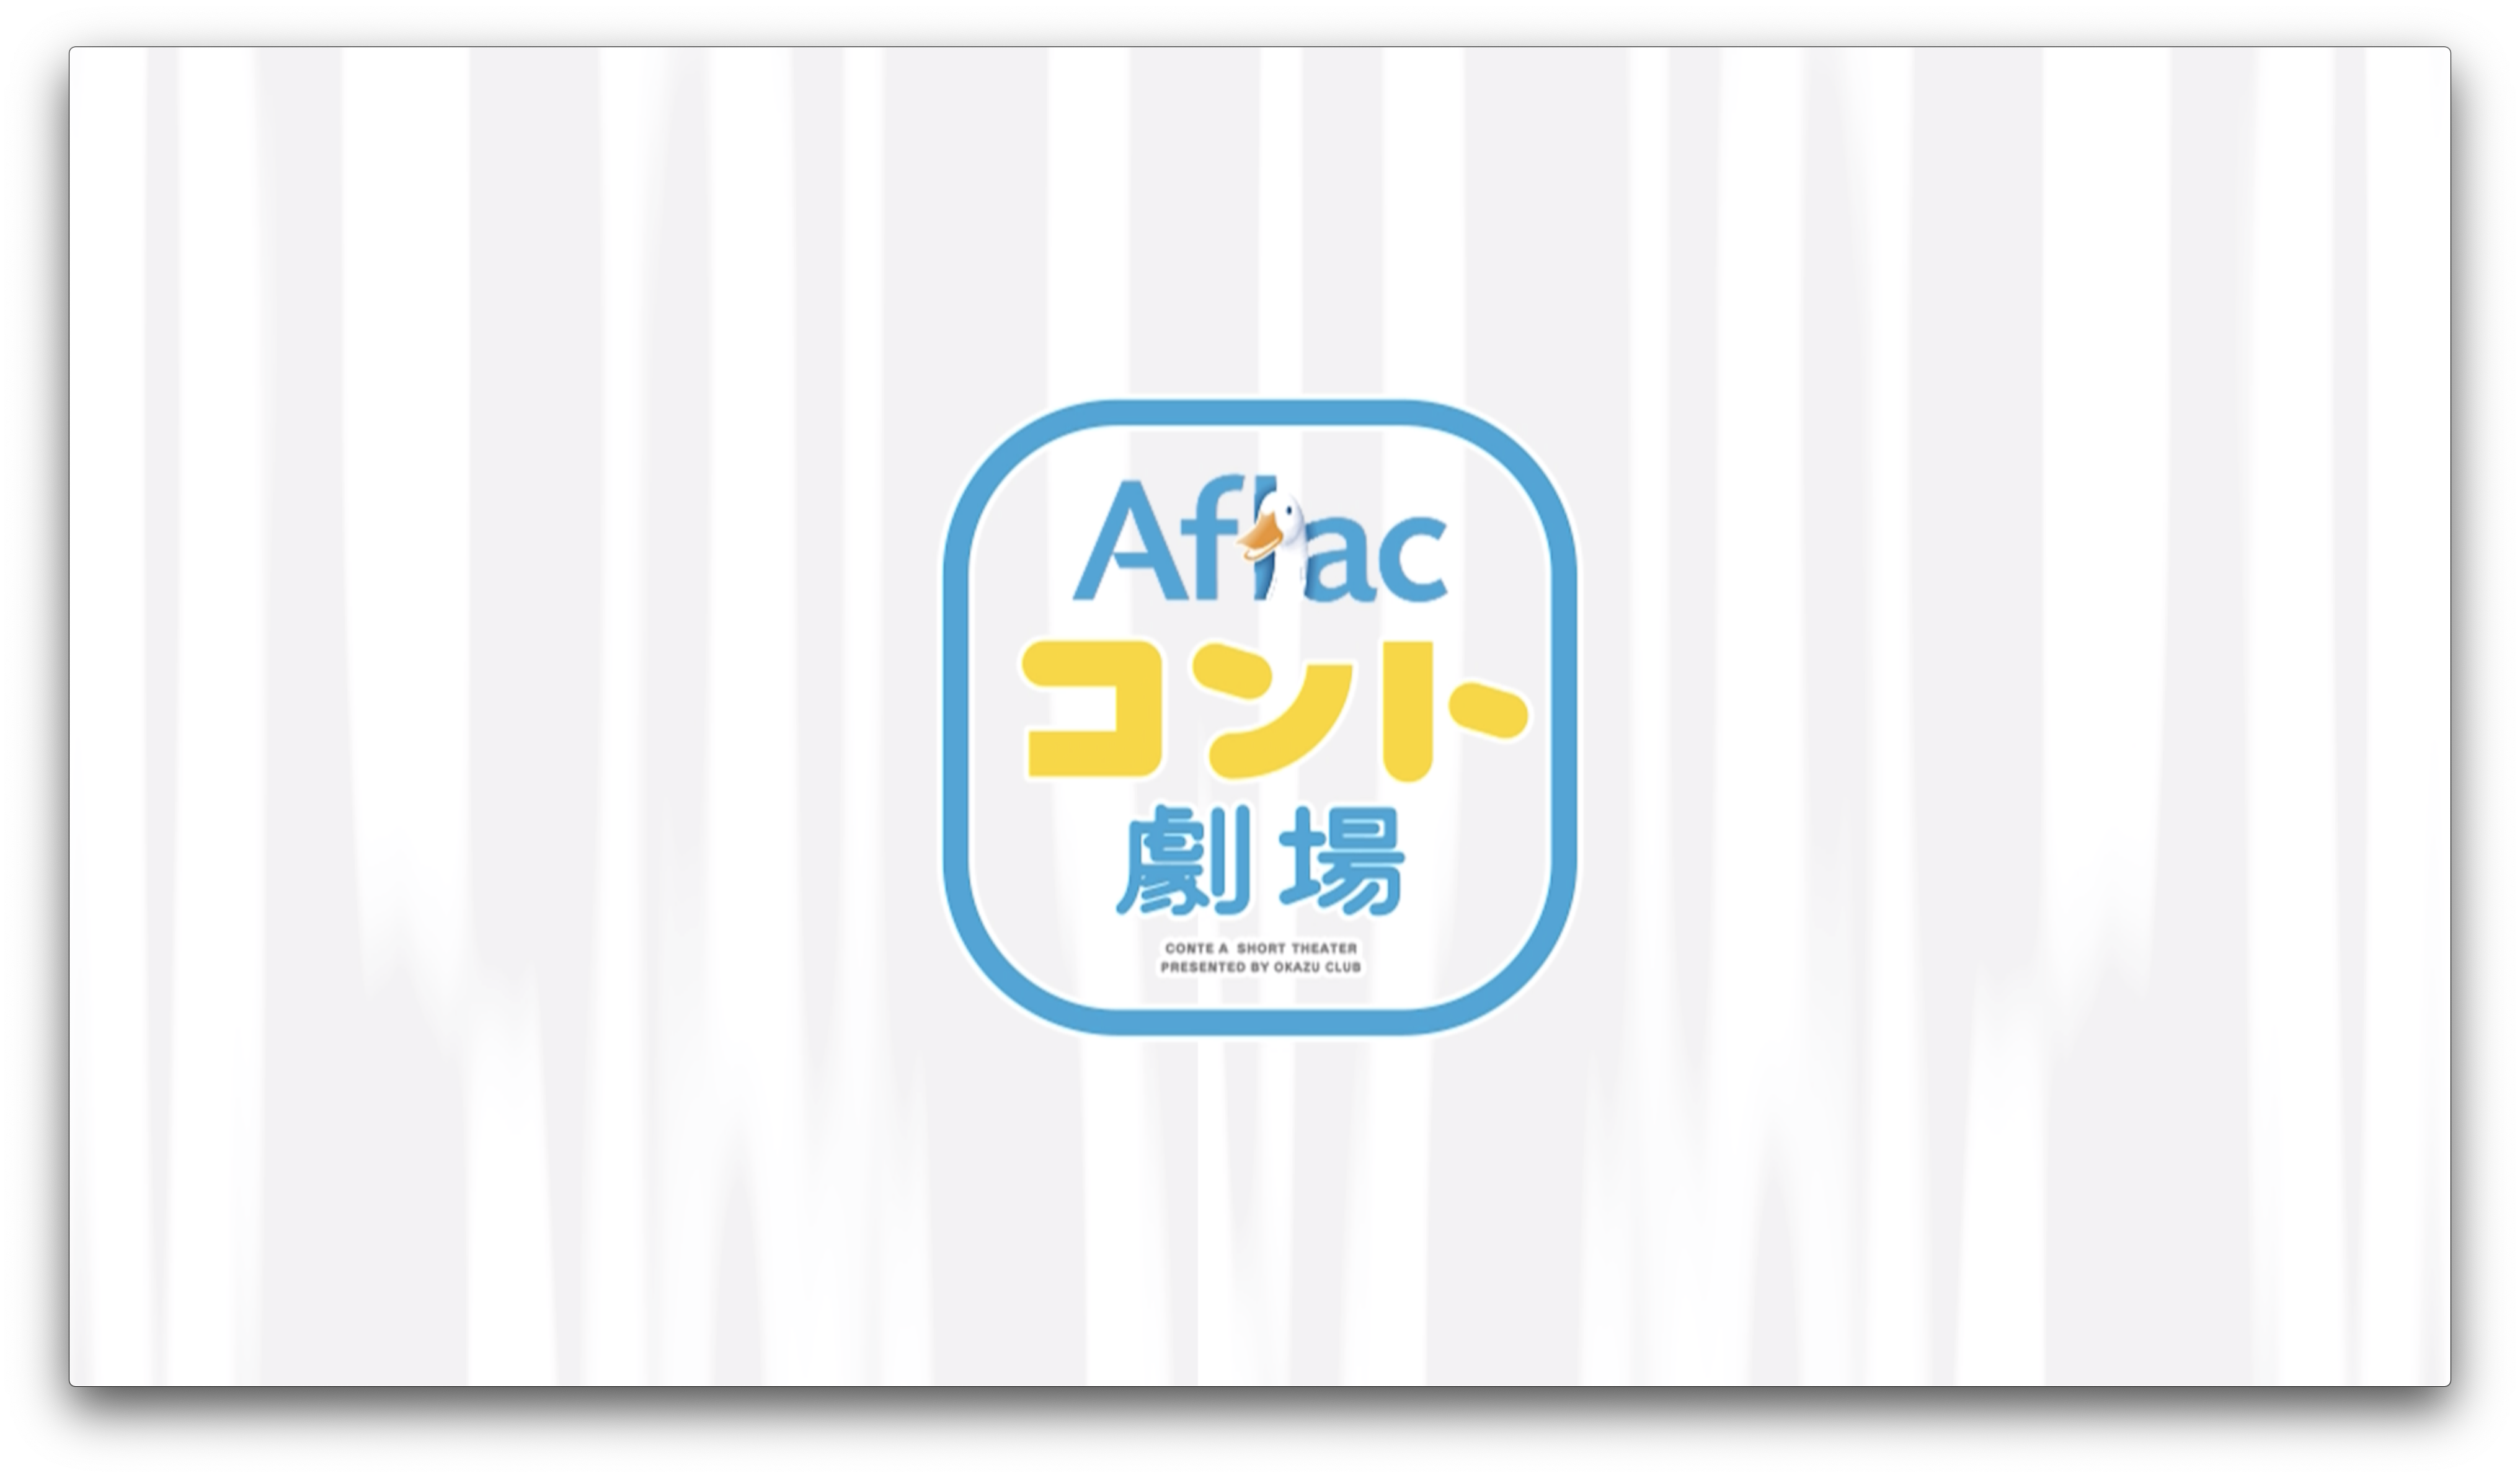 Aflacコント劇場